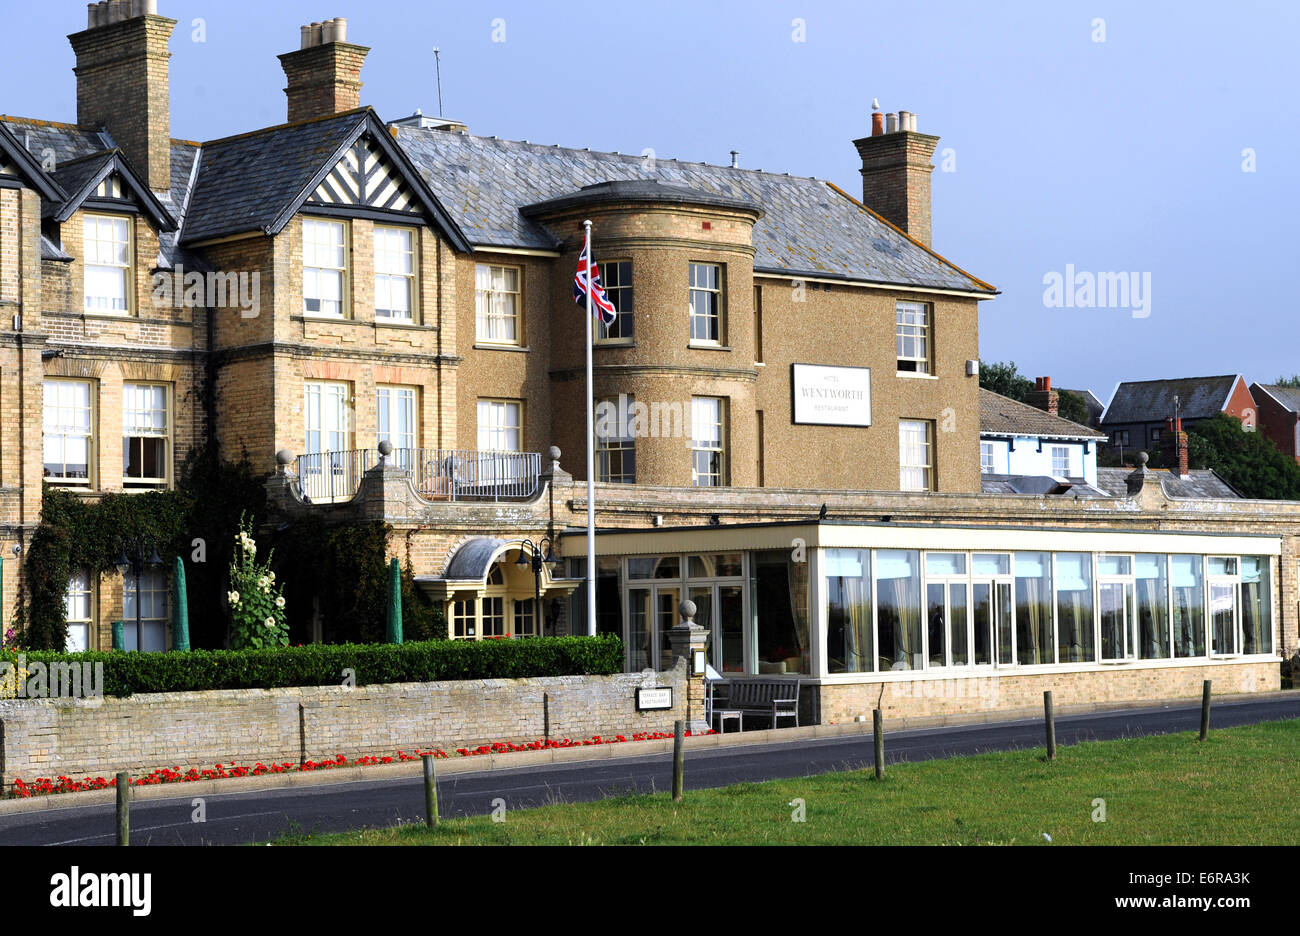 Aldeburgh Suffolk UK - The Wentworth Hotel on the seafront Stock Photo